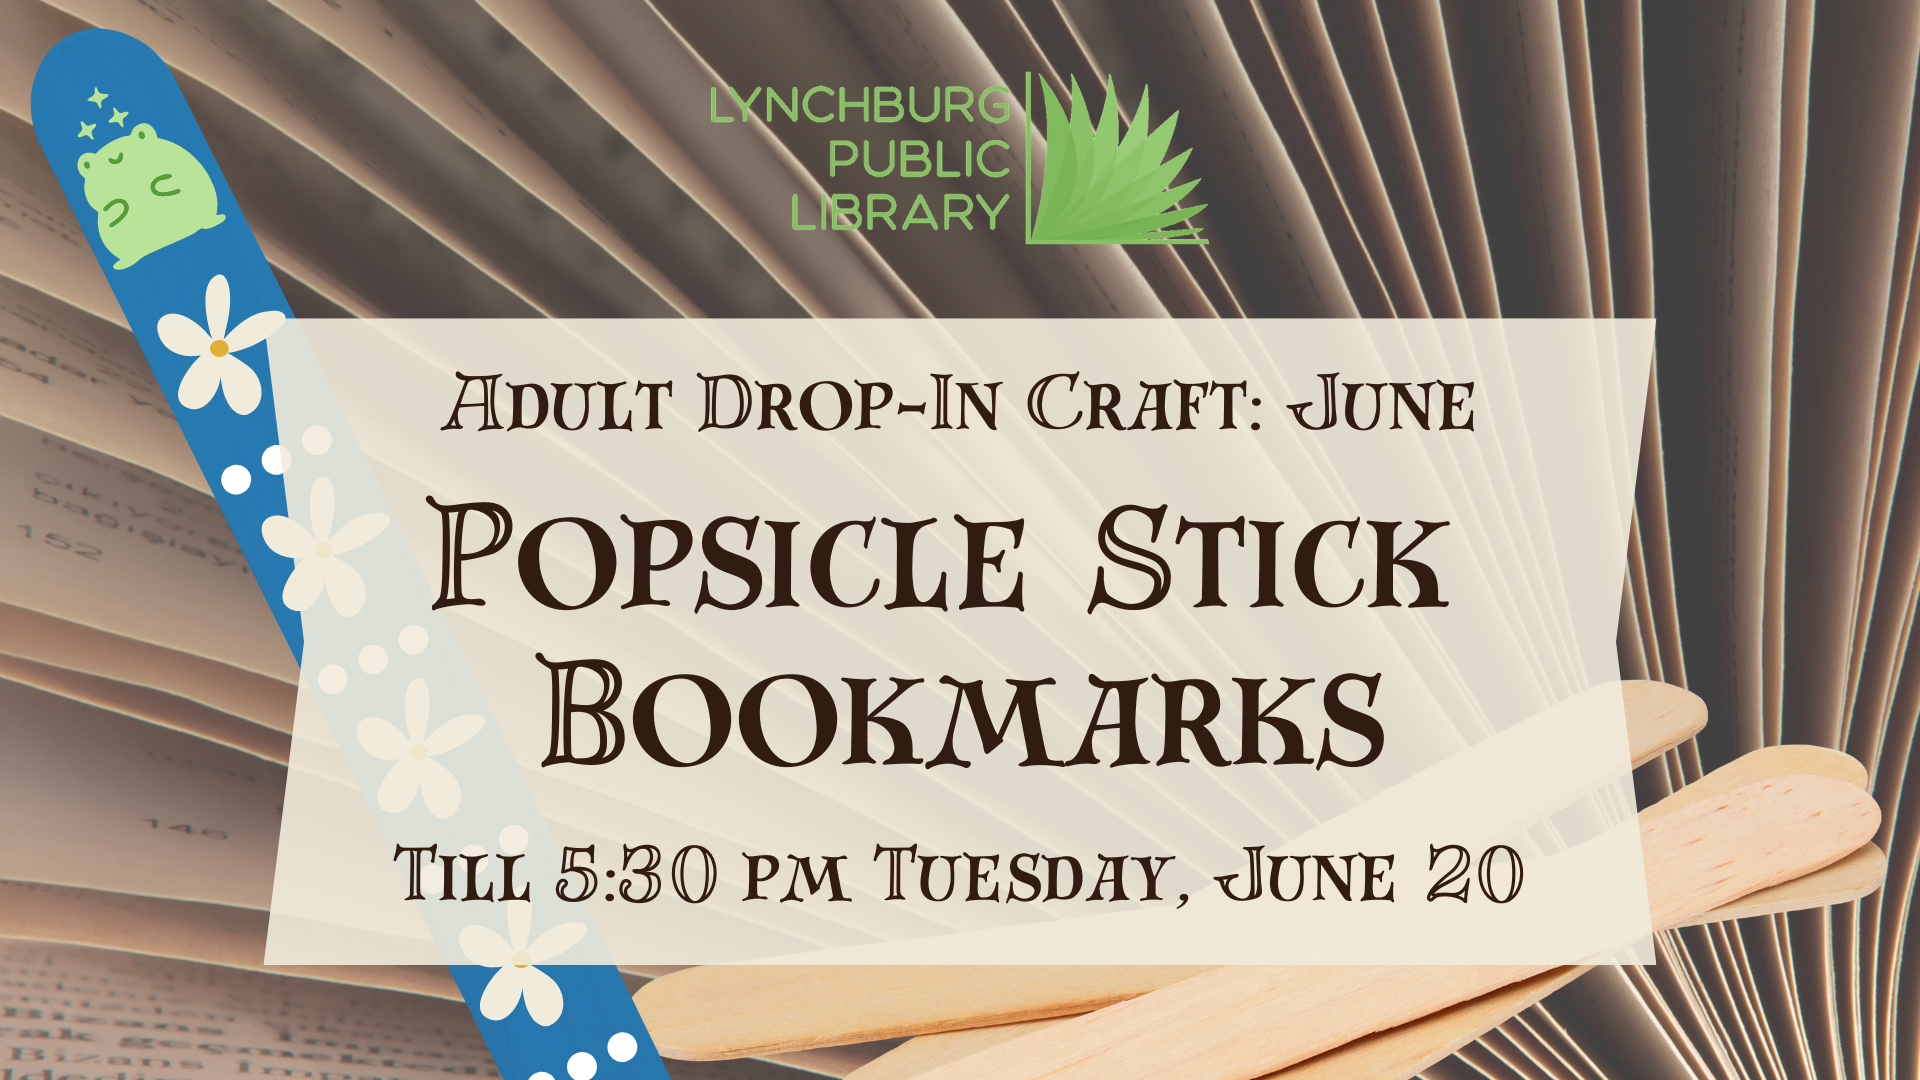 adult drop-in craft: june; popsicle stick bookmarks; till 5:30, Tuesday, June 20th